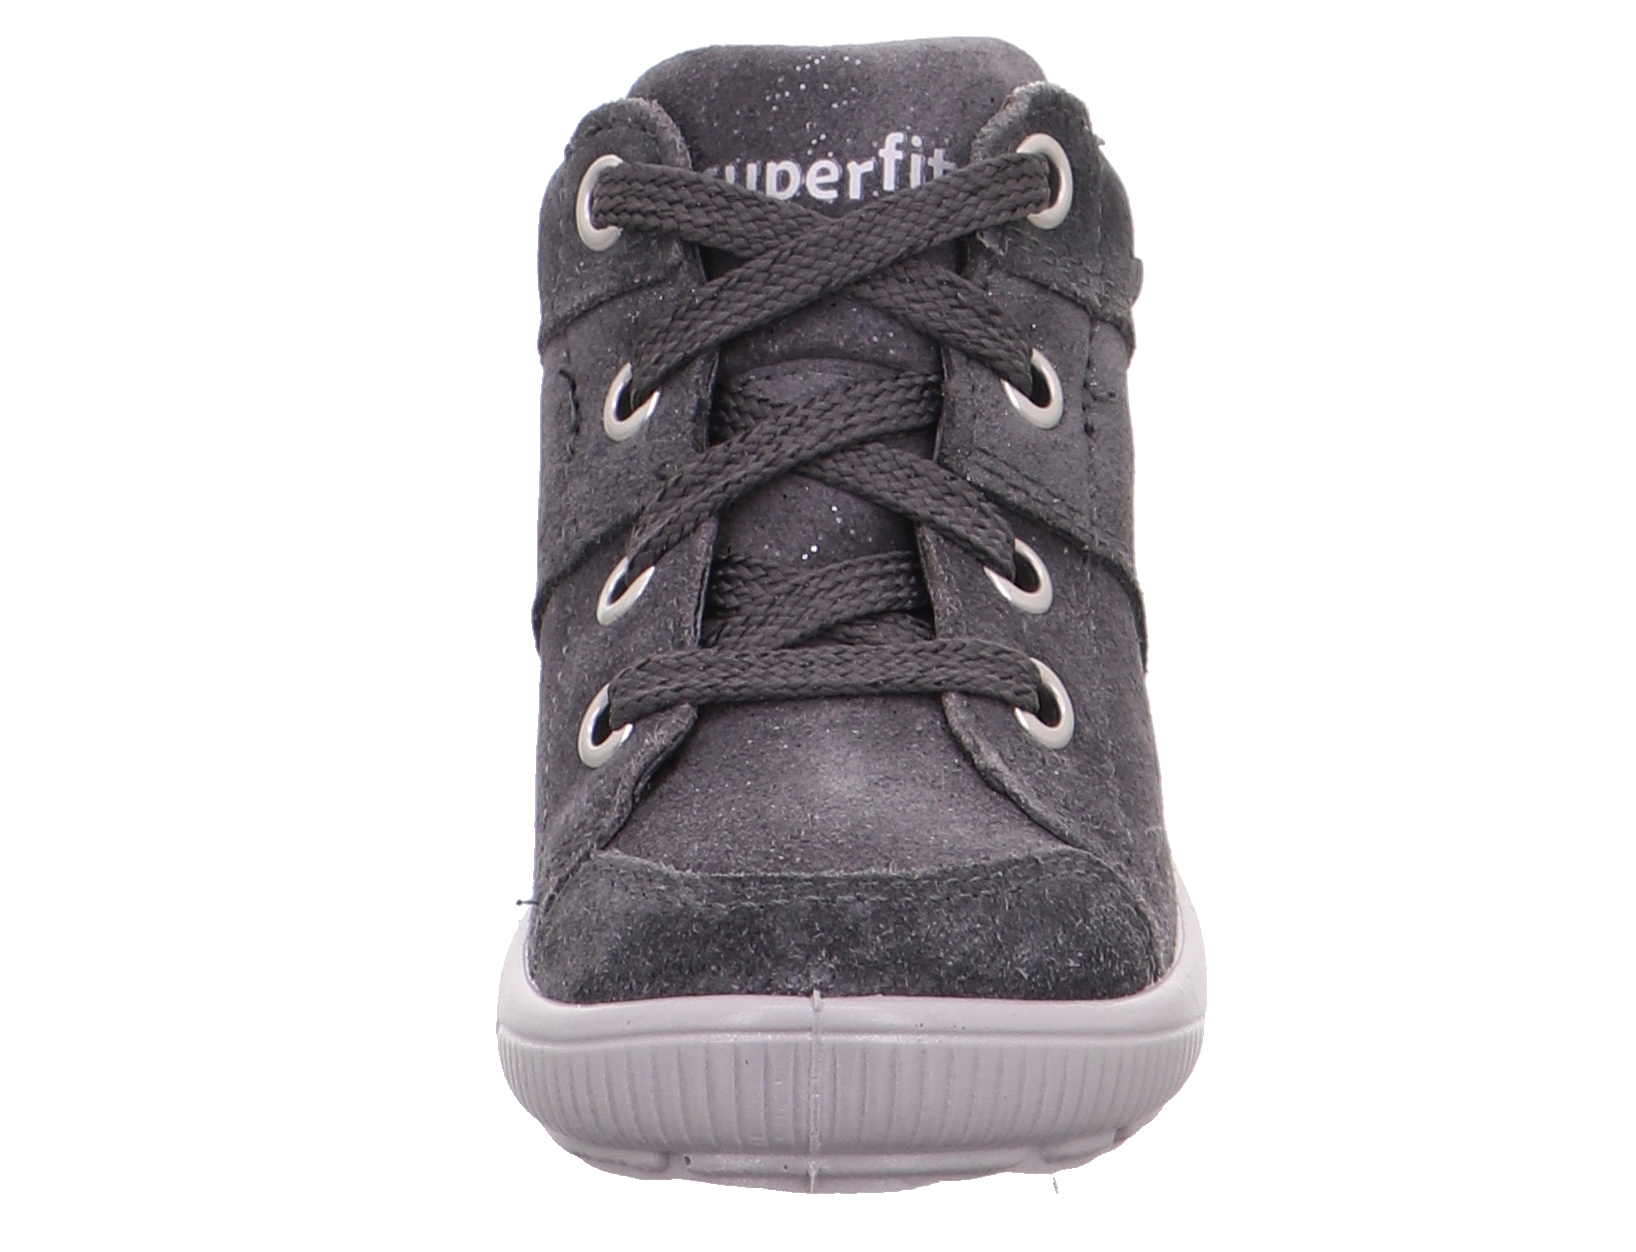 Superfit Starlight - Grey suede leather